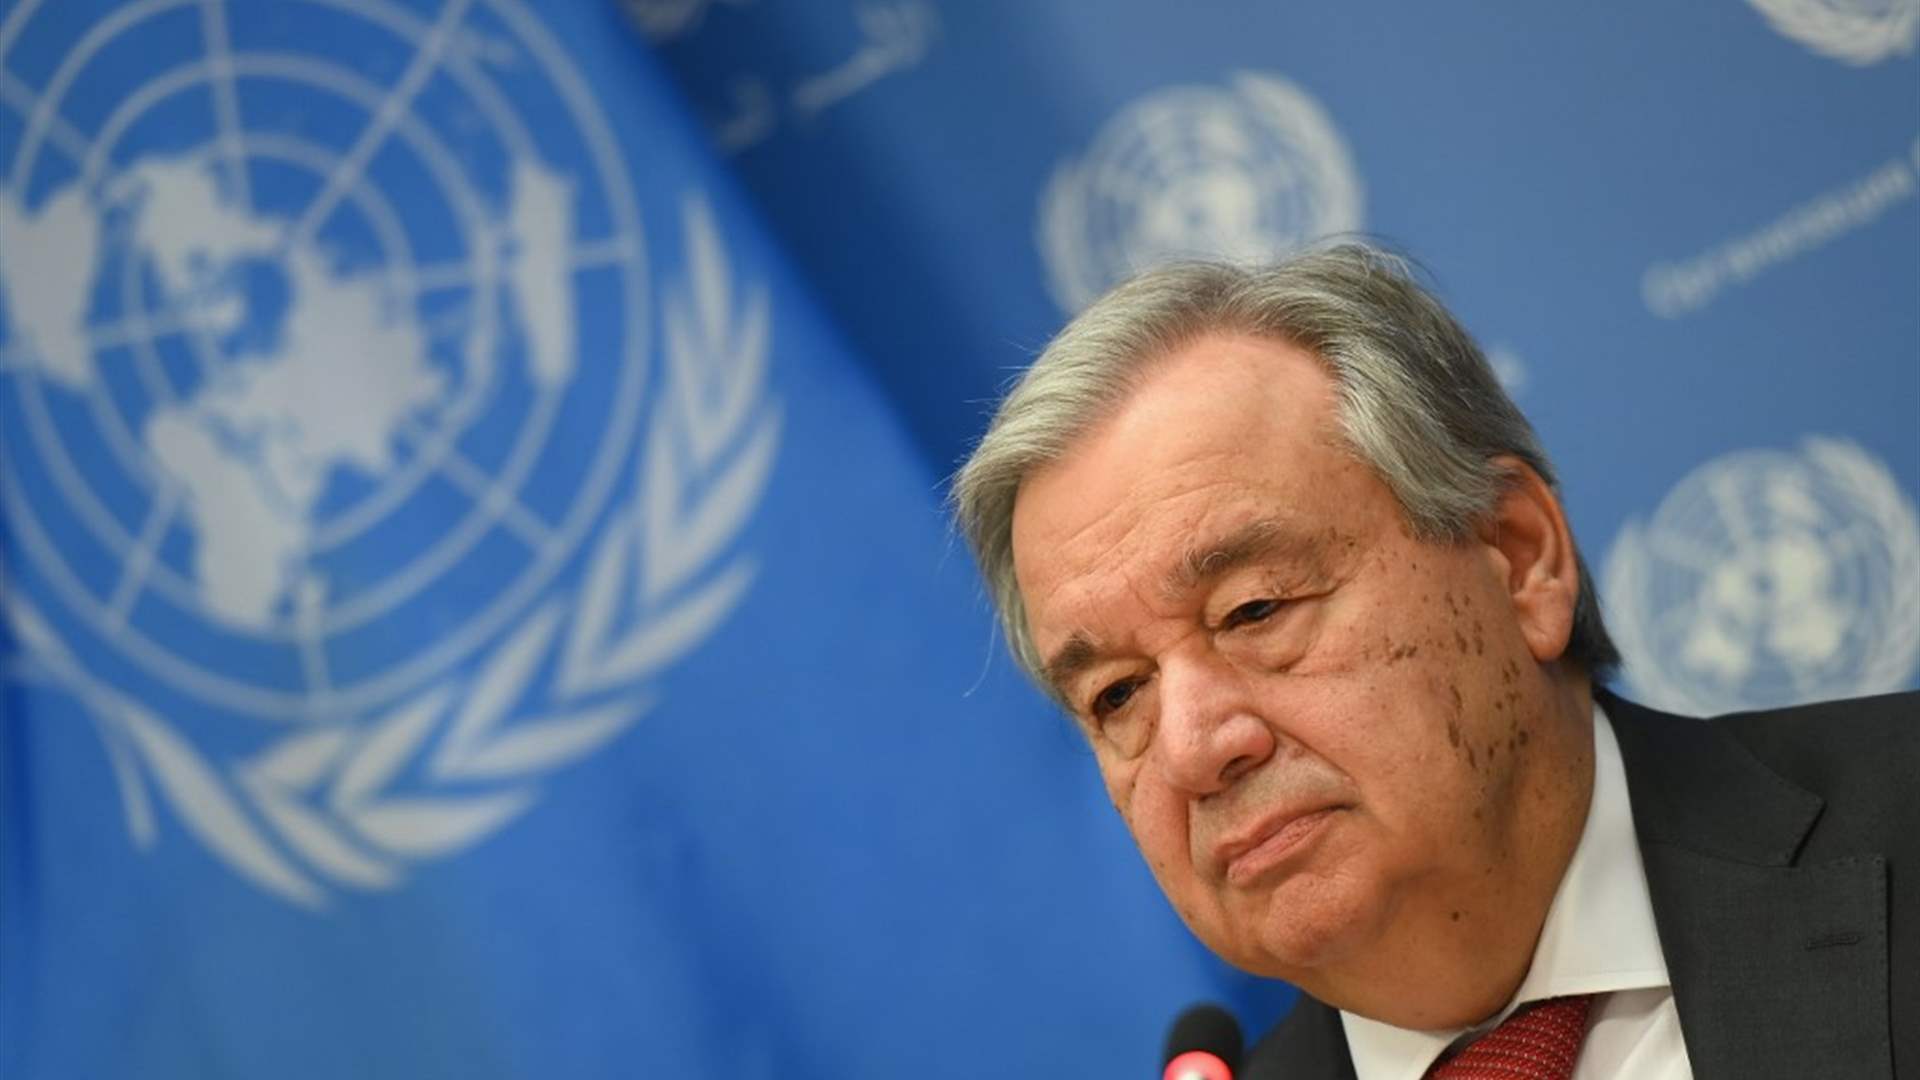 Guterres says: Israeli actions undermine two-state solution, accelerate settlement expansion